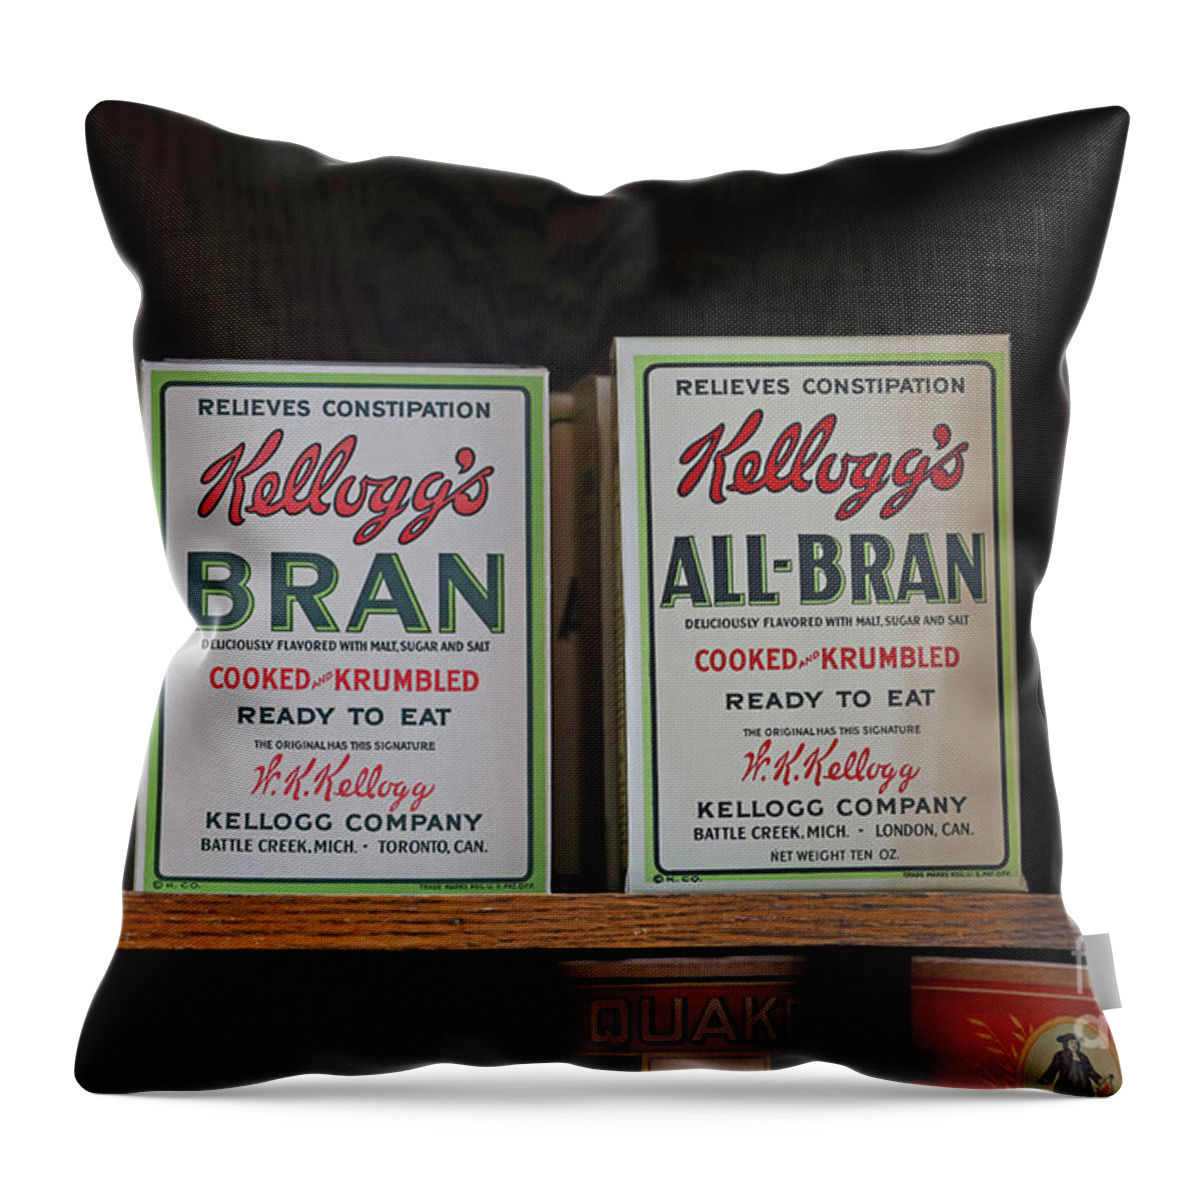 Grocery Store Throw Pillow featuring the photograph Kellogg's Bran Flakes 7327 by Jack Schultz